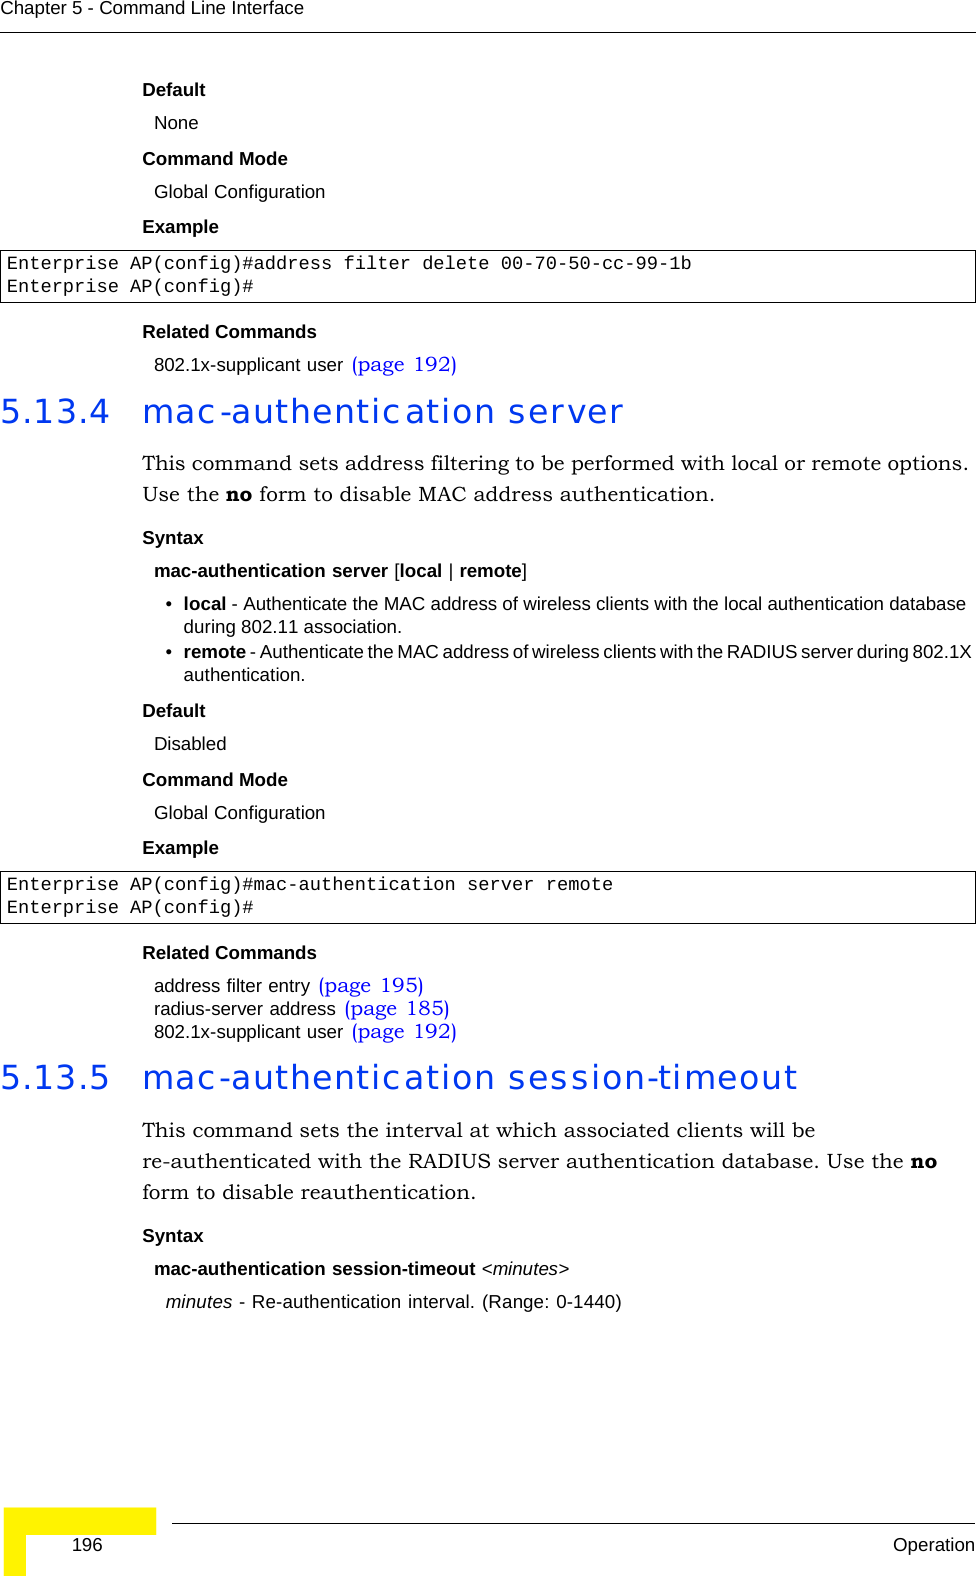  196 OperationChapter 5 - Command Line InterfaceDefaultNoneCommand ModeGlobal ConfigurationExampleRelated Commands802.1x-supplicant user (page 192)5.13.4 mac-authentication serverThis command sets address filtering to be performed with local or remote options. Use the no form to disable MAC address authentication.Syntaxmac-authentication server [local | remote]•local - Authenticate the MAC address of wireless clients with the local authentication database during 802.11 association.•remote - Authenticate the MAC address of wireless clients with the RADIUS server during 802.1X authentication.DefaultDisabledCommand ModeGlobal ConfigurationExampleRelated Commandsaddress filter entry (page 195)radius-server address (page 185)802.1x-supplicant user (page 192)5.13.5 mac-authentication session-timeoutThis command sets the interval at which associated clients will be re-authenticated with the RADIUS server authentication database. Use the no form to disable reauthentication.Syntaxmac-authentication session-timeout &lt;minutes&gt;minutes - Re-authentication interval. (Range: 0-1440)Enterprise AP(config)#address filter delete 00-70-50-cc-99-1b Enterprise AP(config)#Enterprise AP(config)#mac-authentication server remoteEnterprise AP(config)#